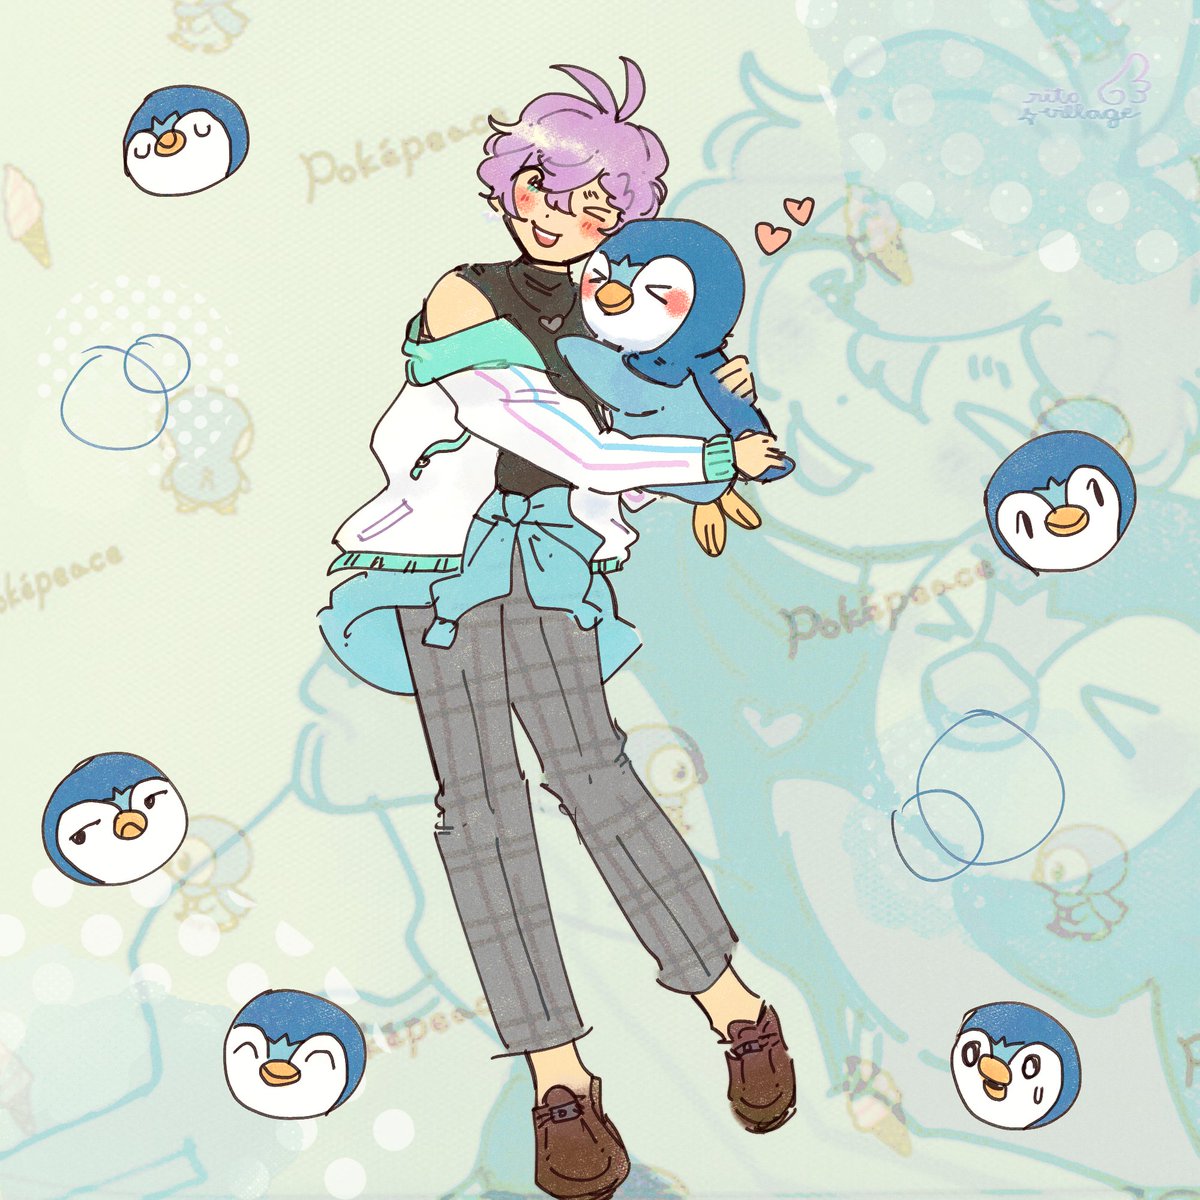 i love you piplup!! 🫧🐧
#世界ペンギンの日 
#WorldPenguinDay